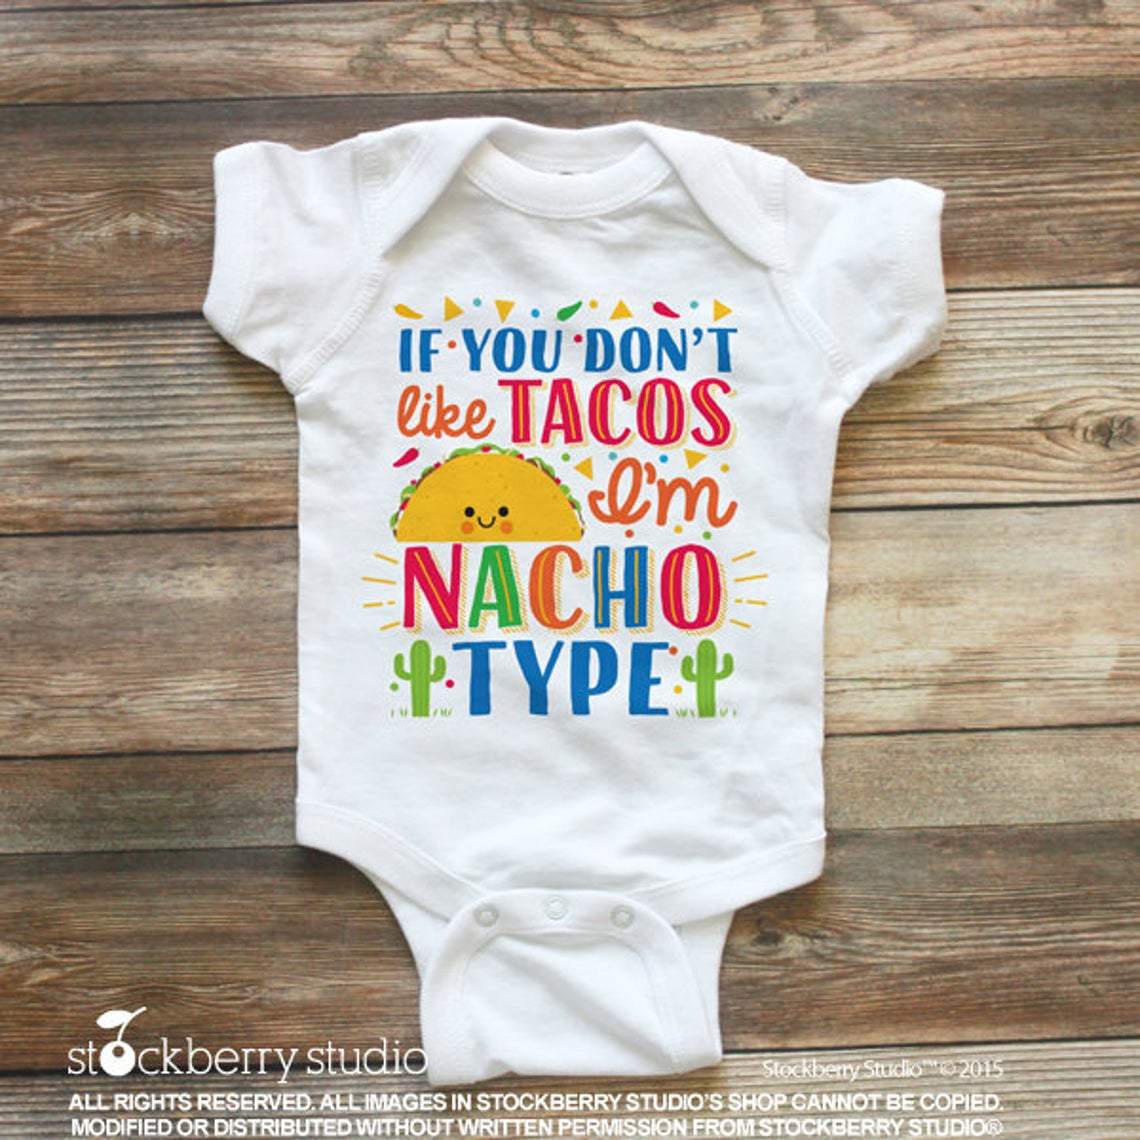 Taco Baby Clothes If You Don't Like Tacos Then I'm Nacho Type - Stockberry Studio